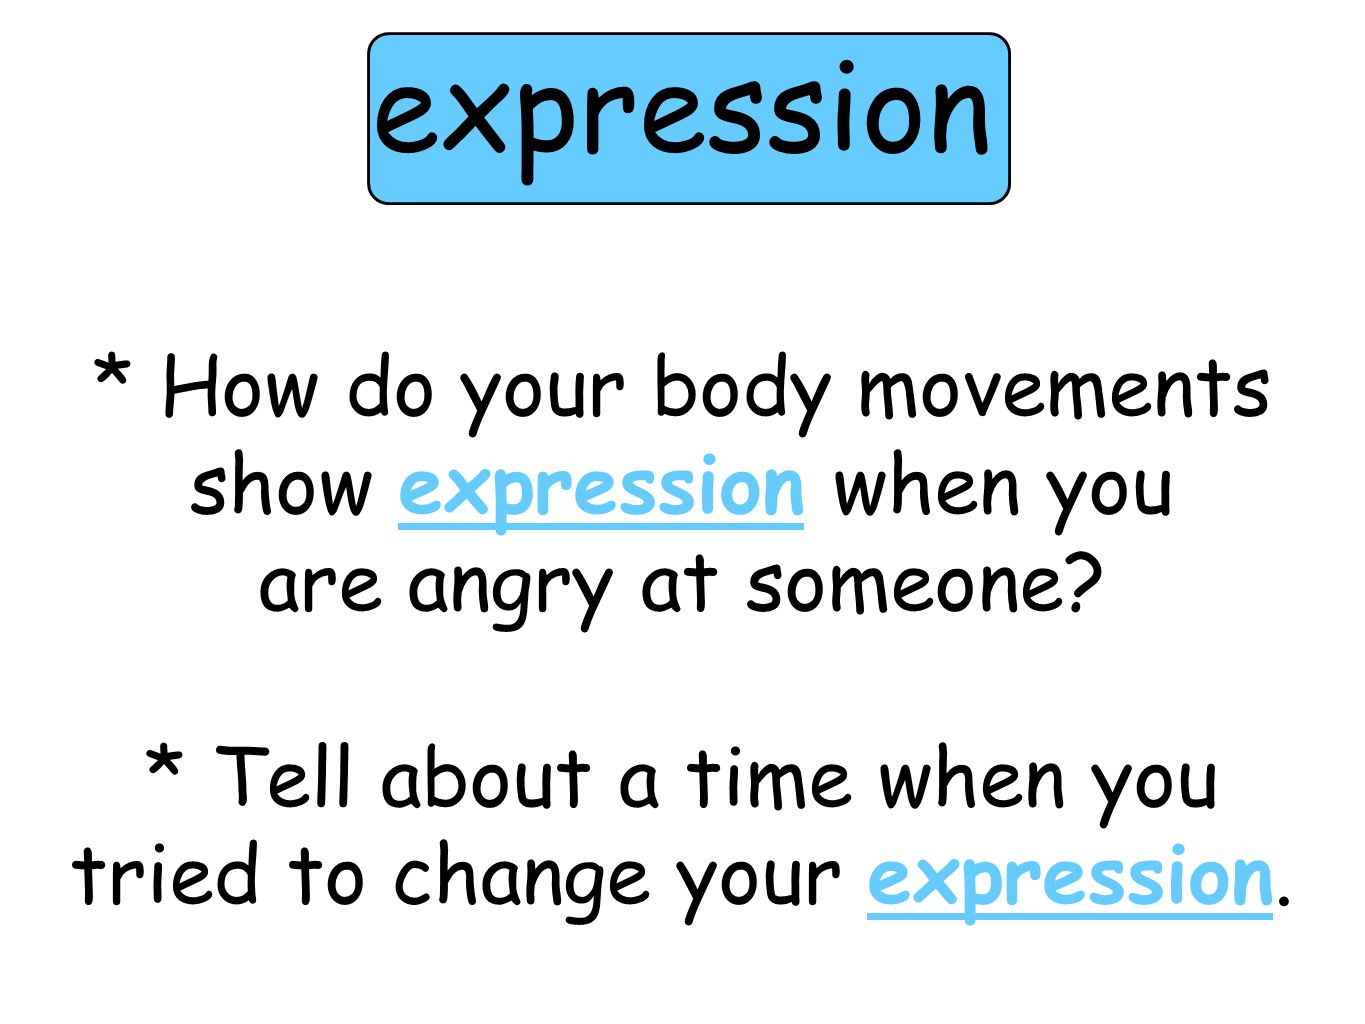 * How do your body movements show expression when you are angry at someone.